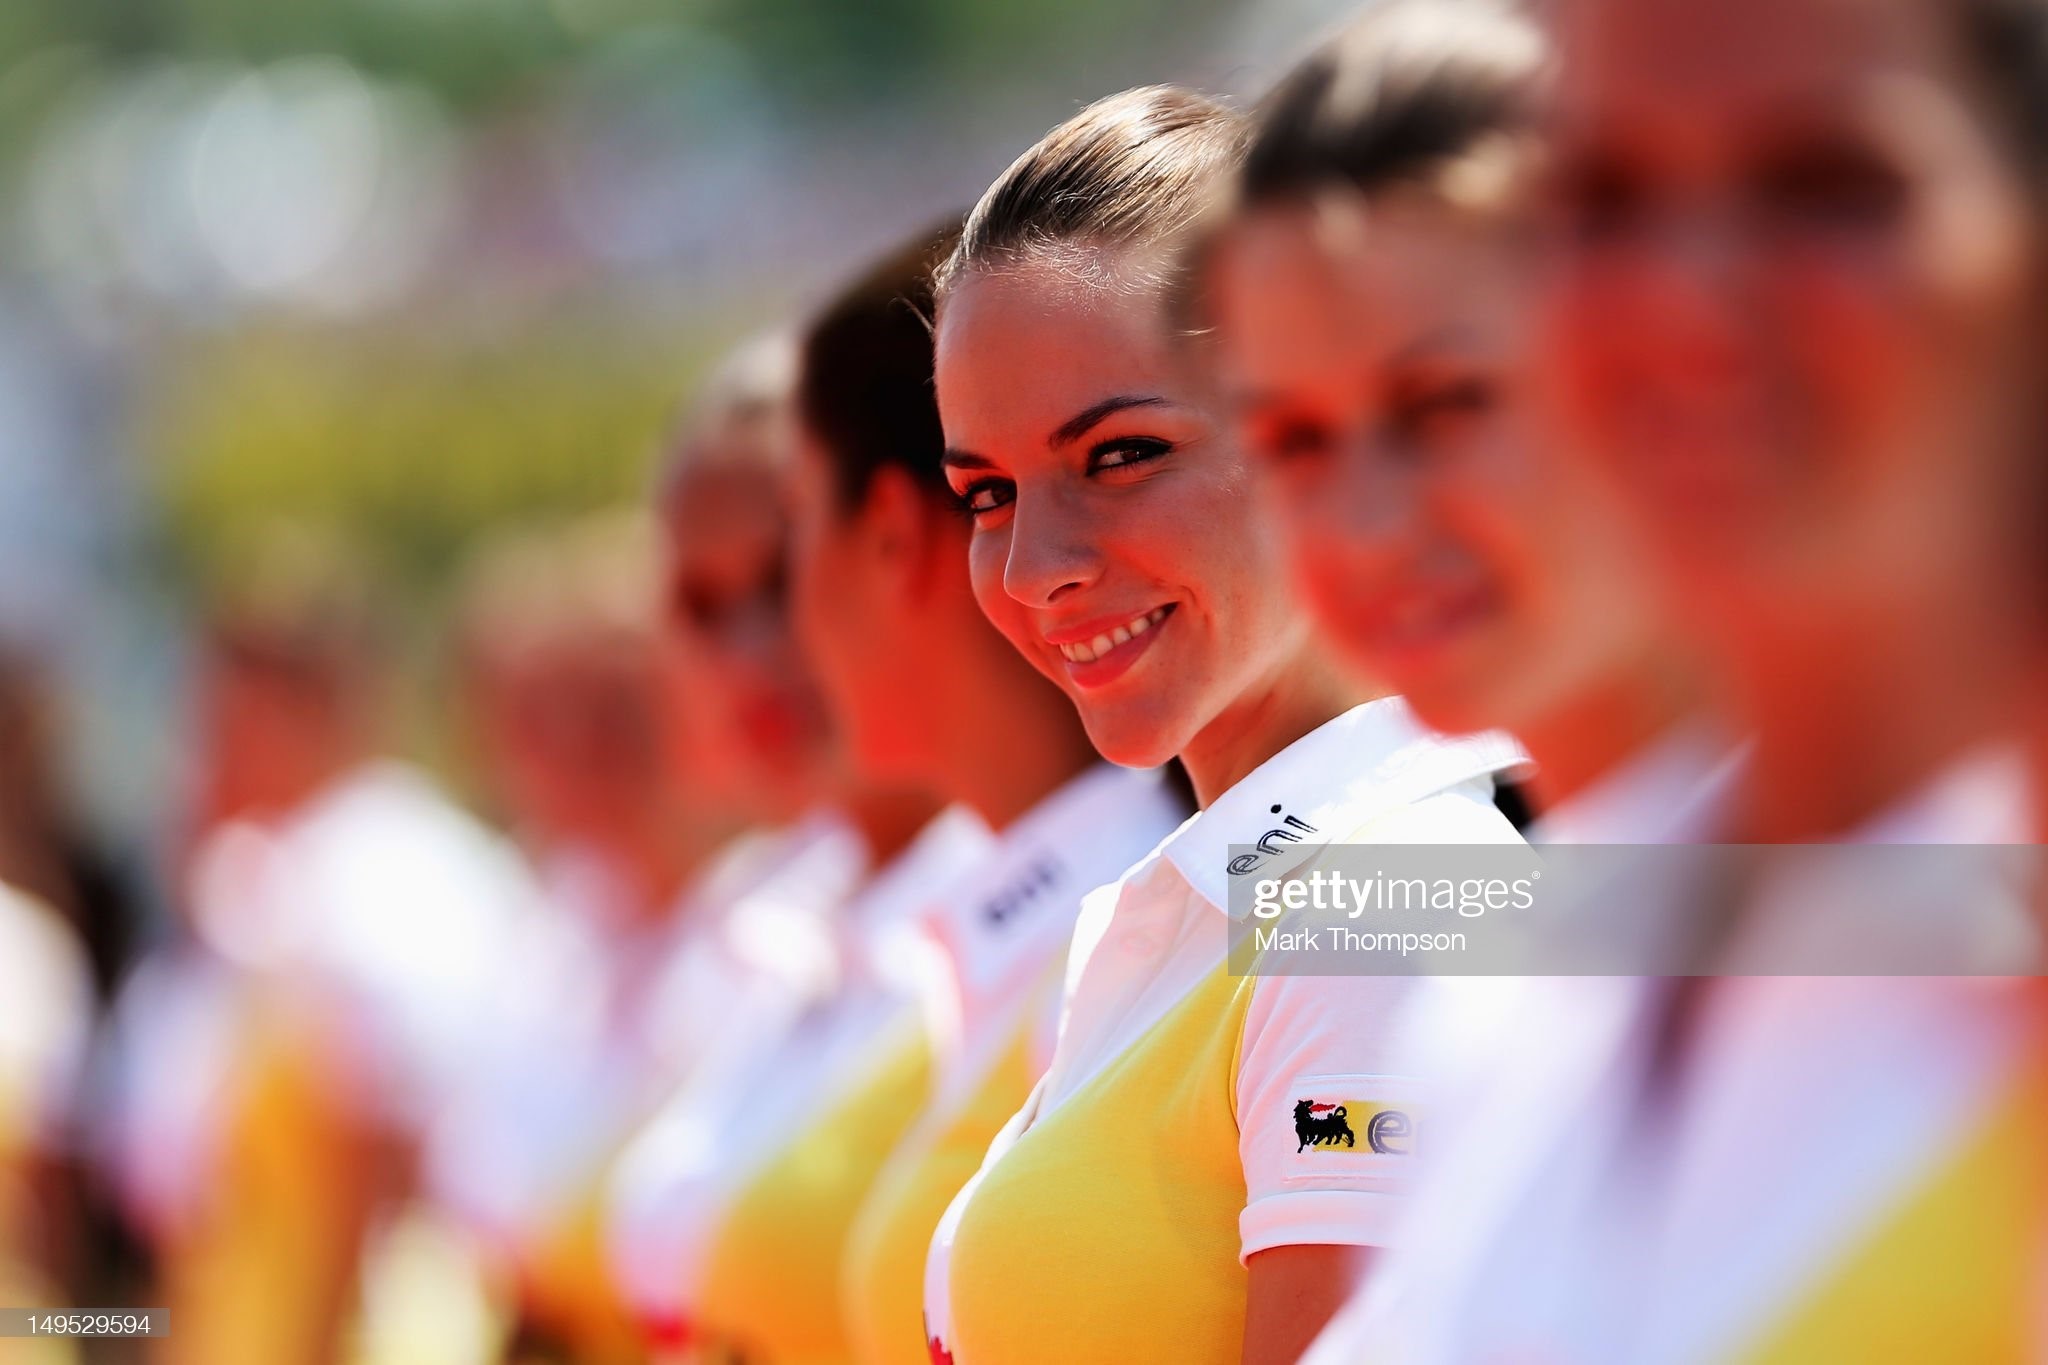 Grid girls attend the drivers parade before the Hungarian Formula One Grand Prix at the Hungaroring on July 29, 2012 in Budapest, Hungary.